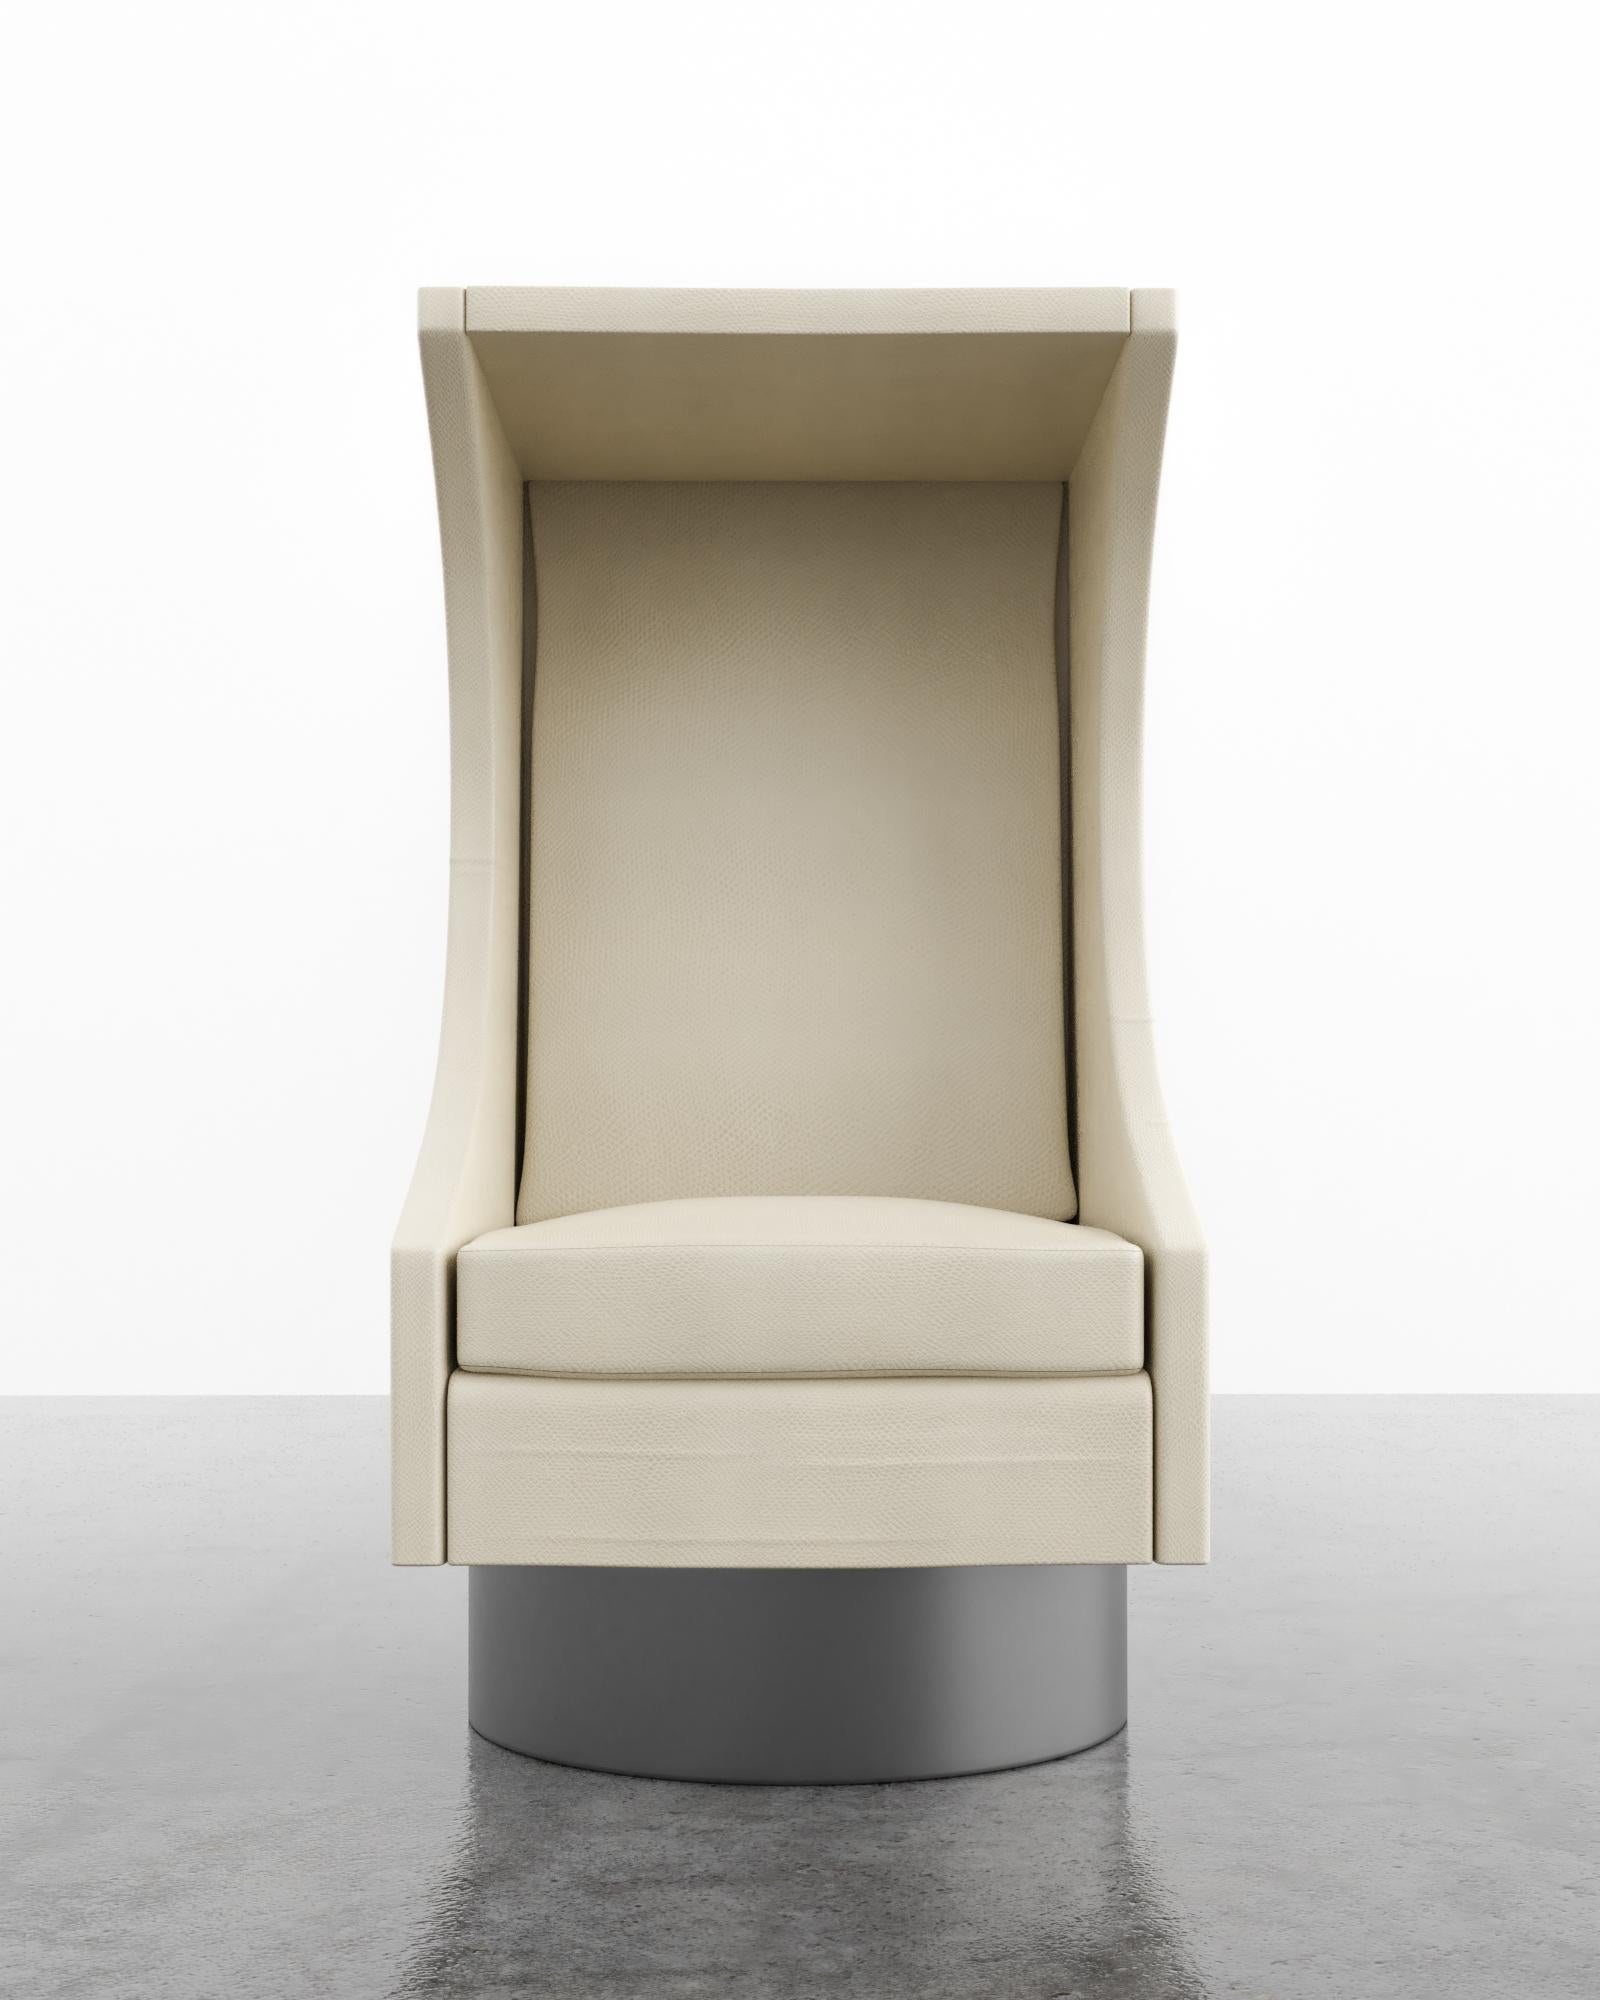 The Lilly chair is a modern clean version of the wing back chair. Fully custom and made to order in California. As shown in Kimodo lizard/cream $9,490. Starting at $7,910.